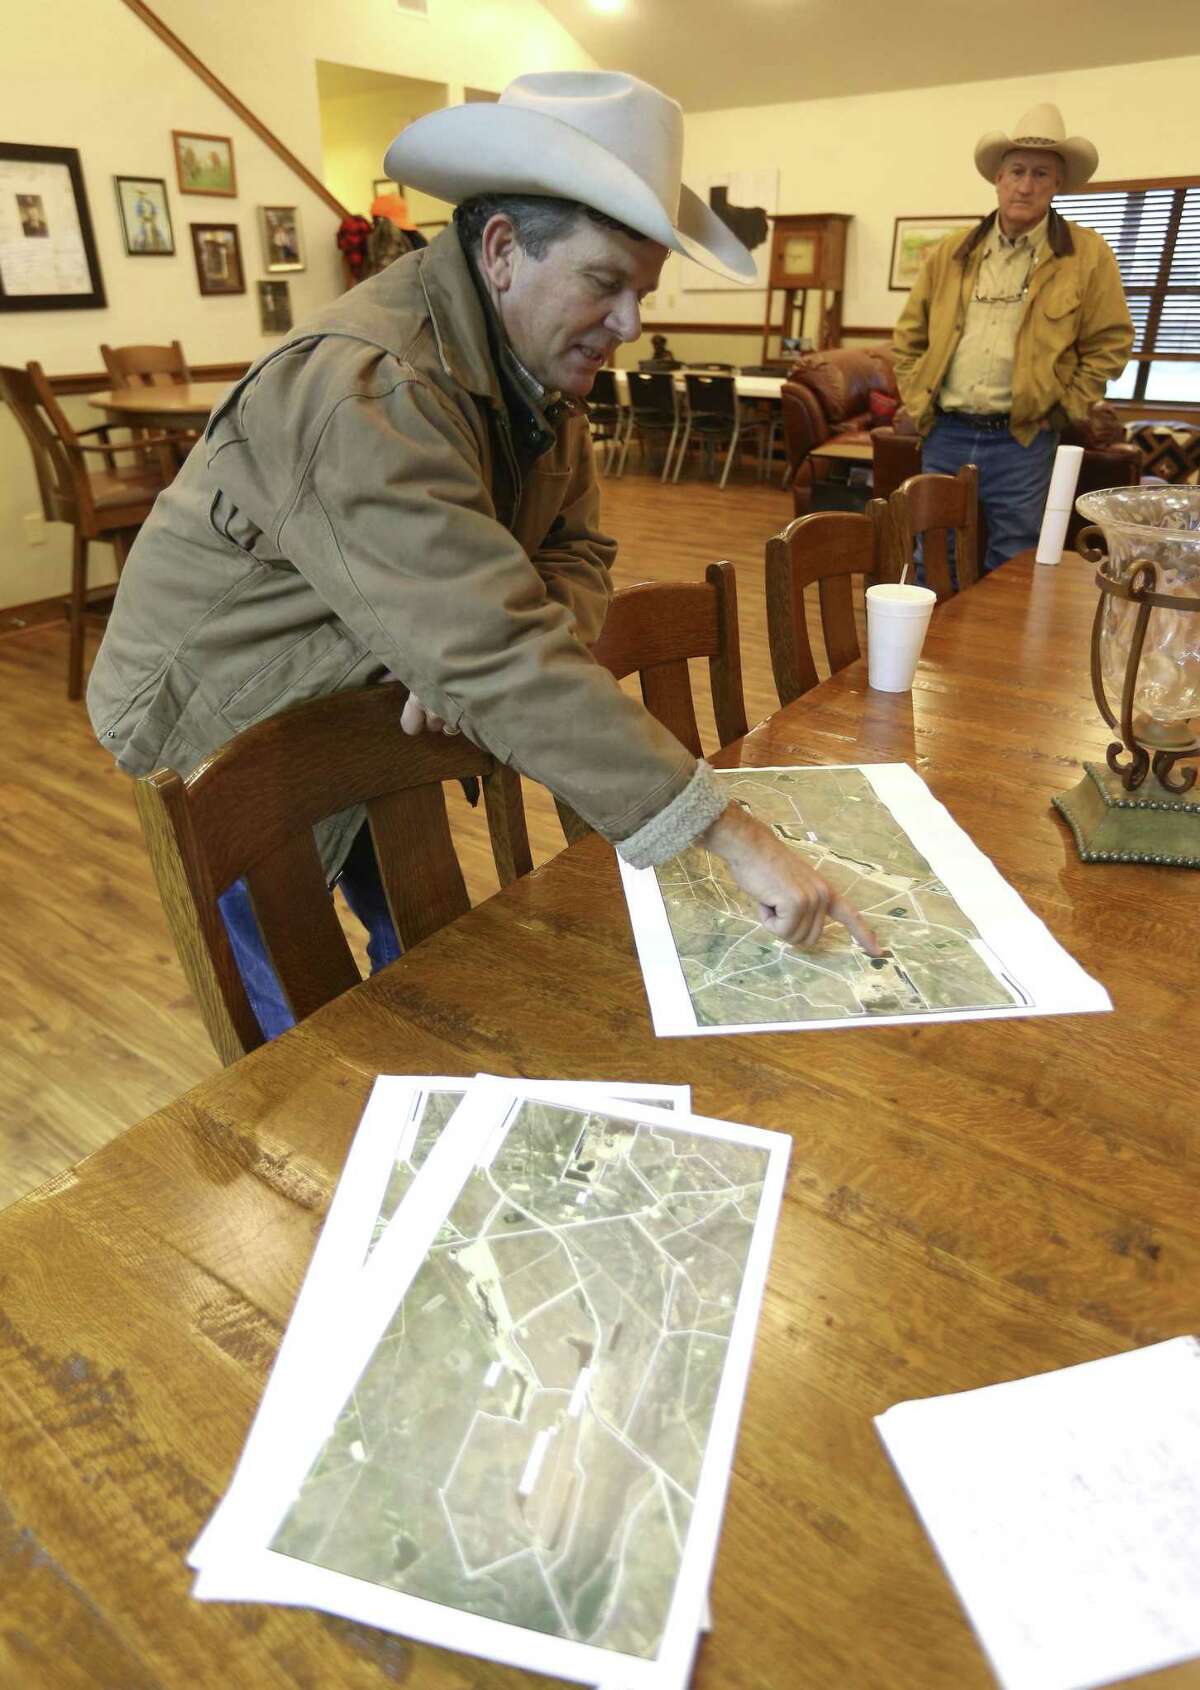 Jason Peeler points to maps of his family's ranch Wednesday, Jan. 16, 2018, as he tells visitors to the ranch about damage he says has been caused to parts of the property by San Miguel Electric Cooperative's coal-burning power plant.